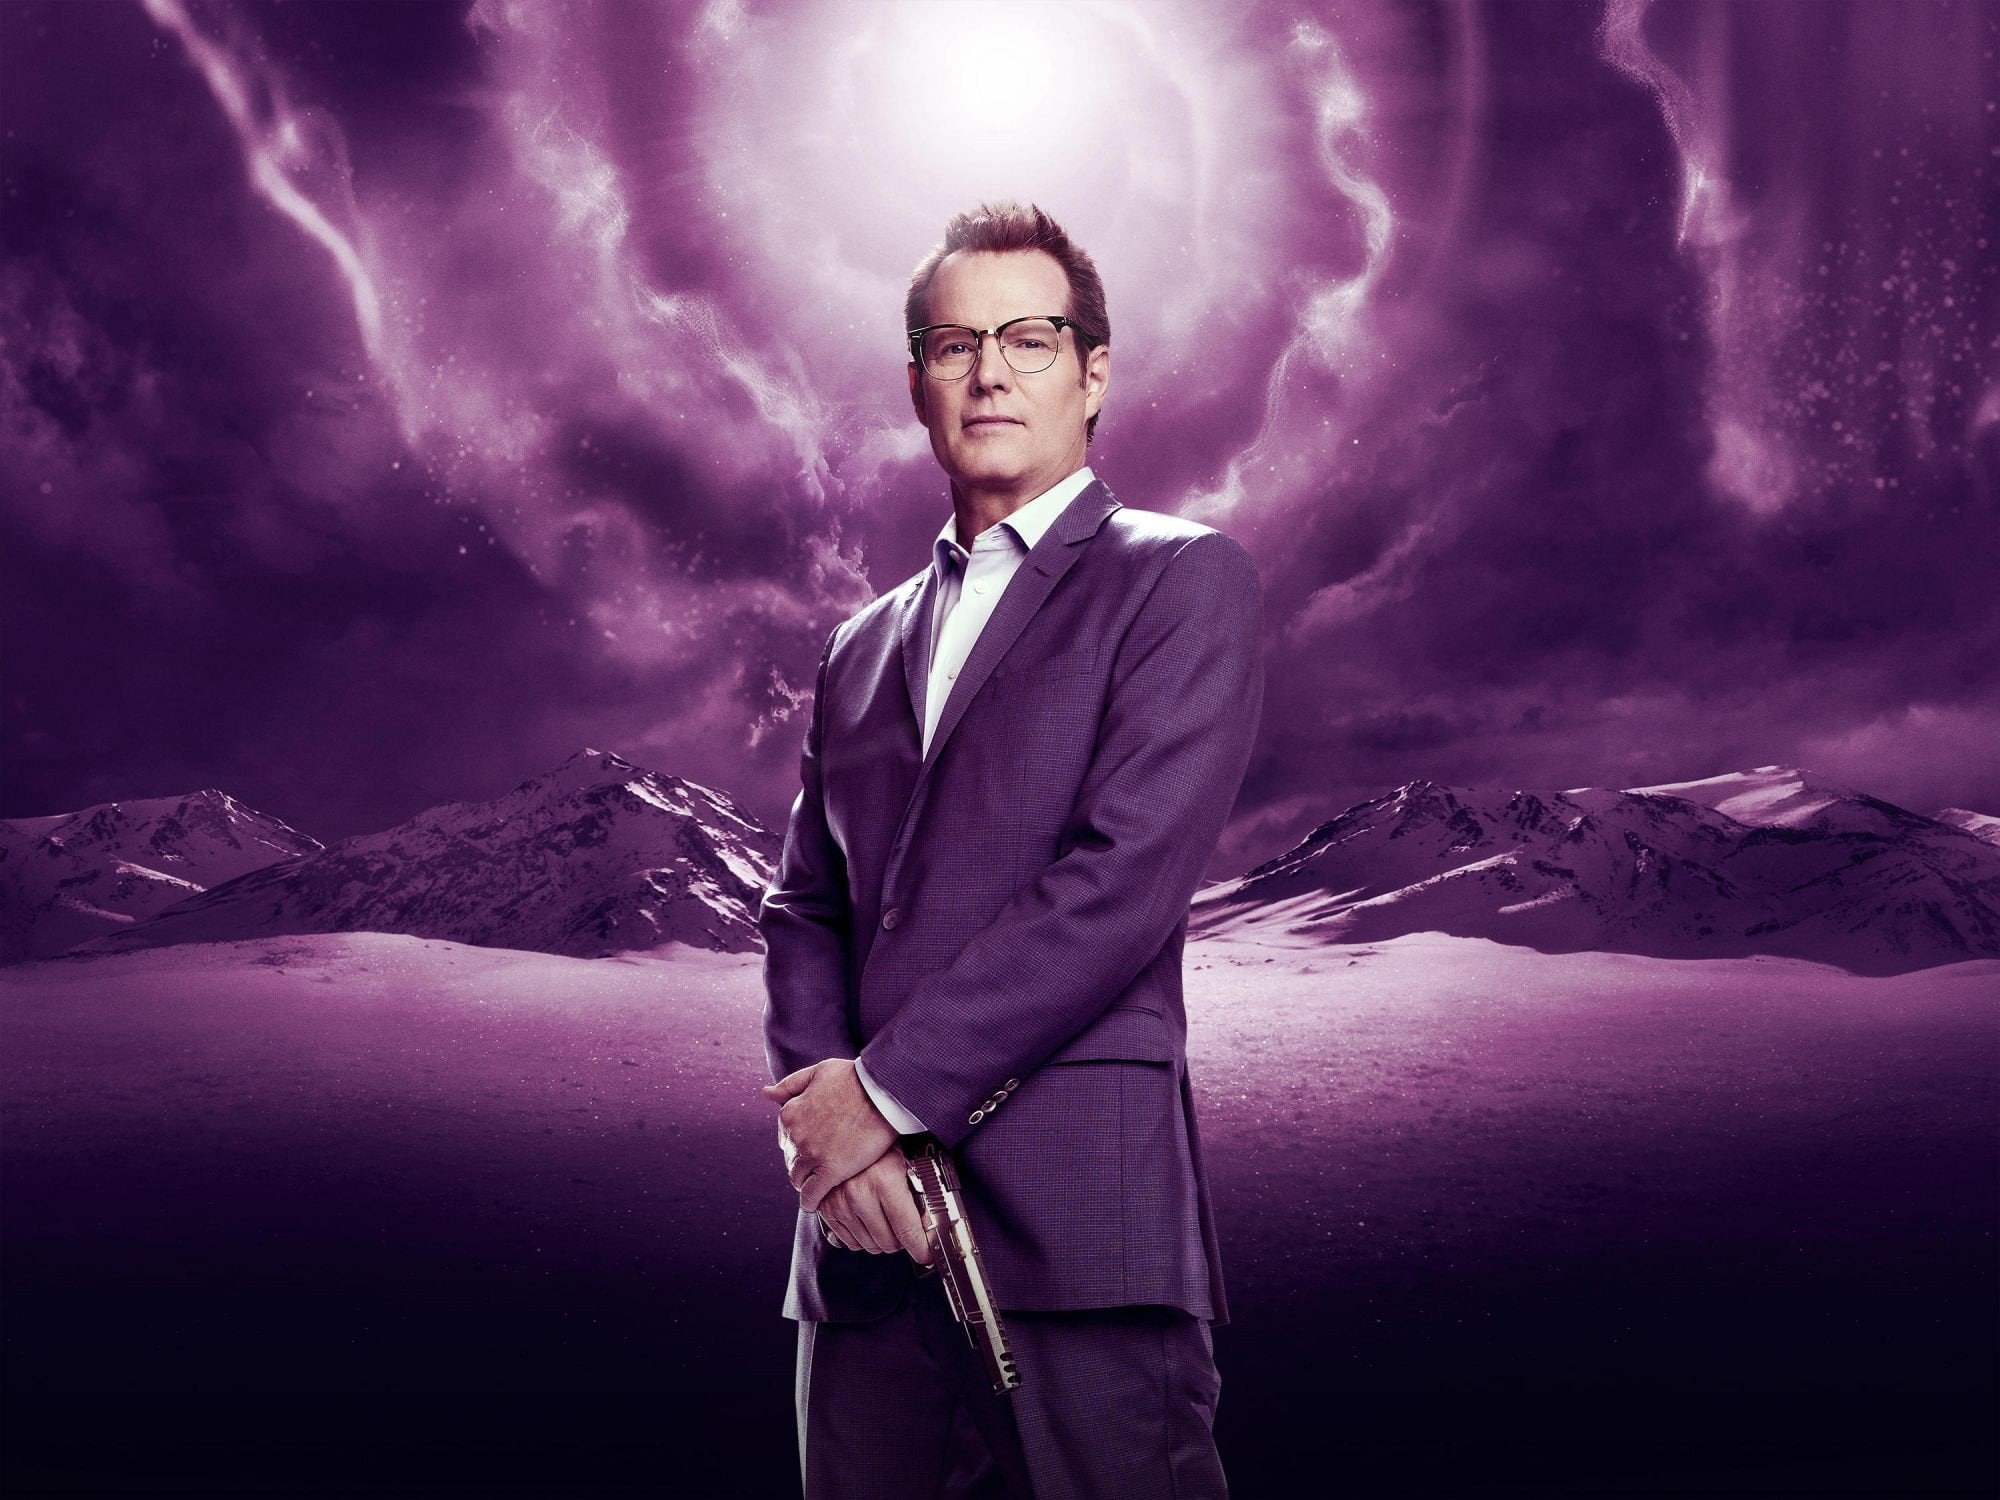 heroes reborn, adult, standing, one person, business, sky, suit